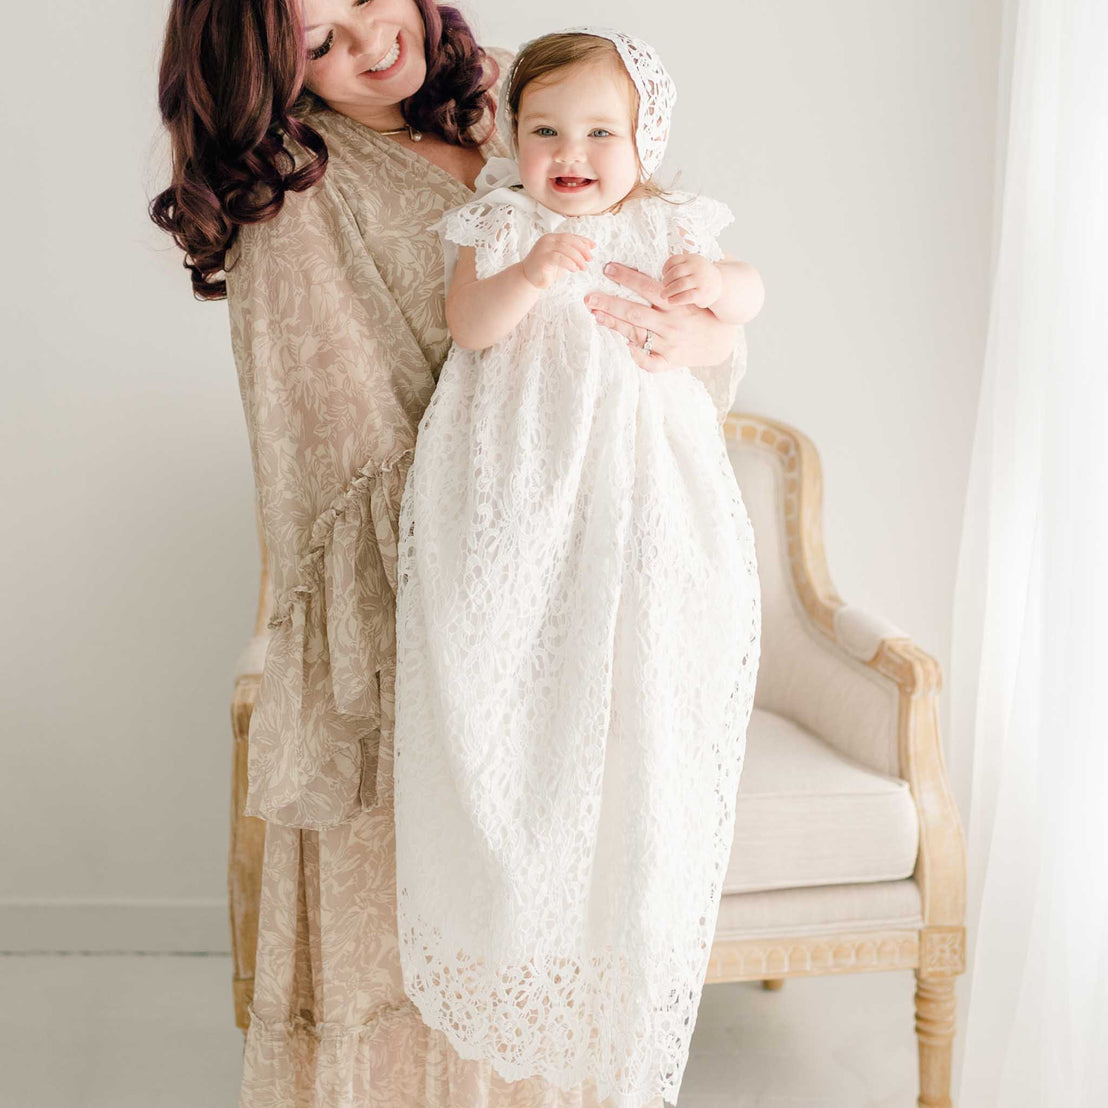 Baby girl with her mother. She is wearing the Lola Christening Gown and Bonnet, a baptismal gown made with a cotton undergown in light ivory featuring an all-over lace overlay.